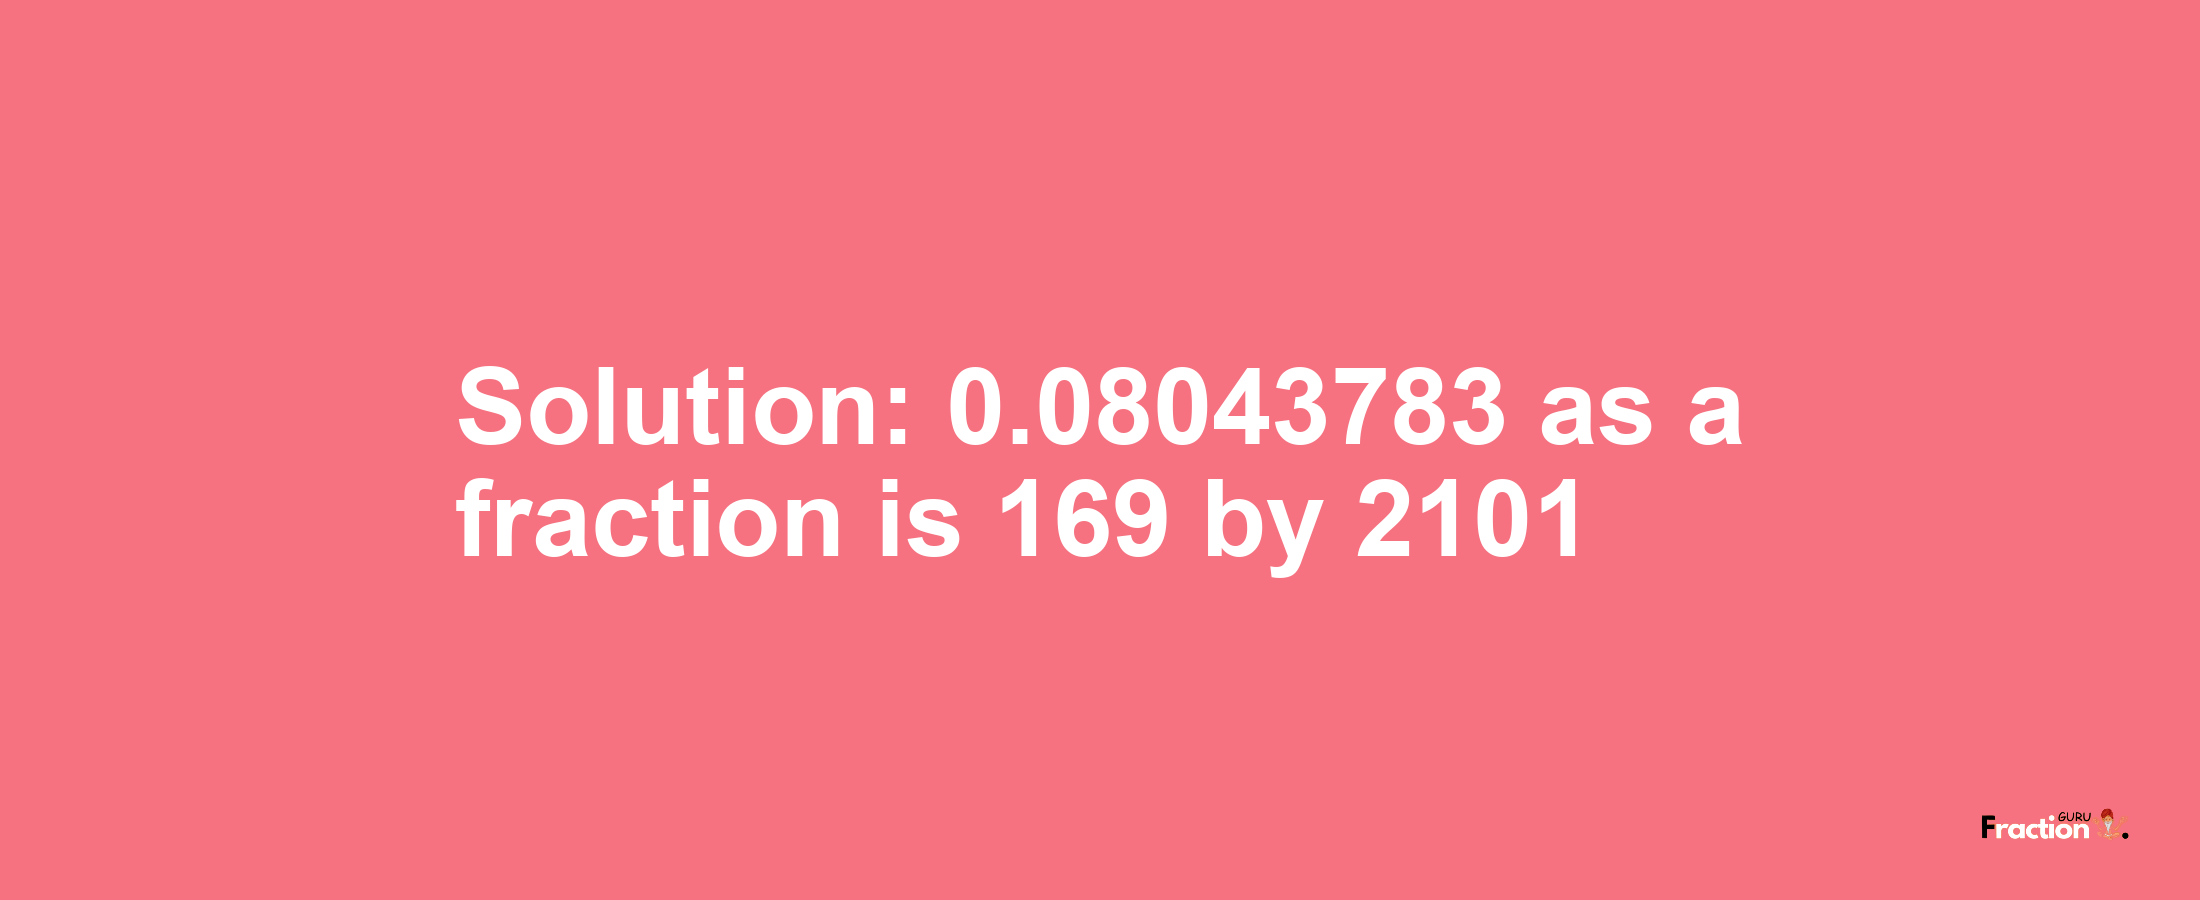 Solution:0.08043783 as a fraction is 169/2101